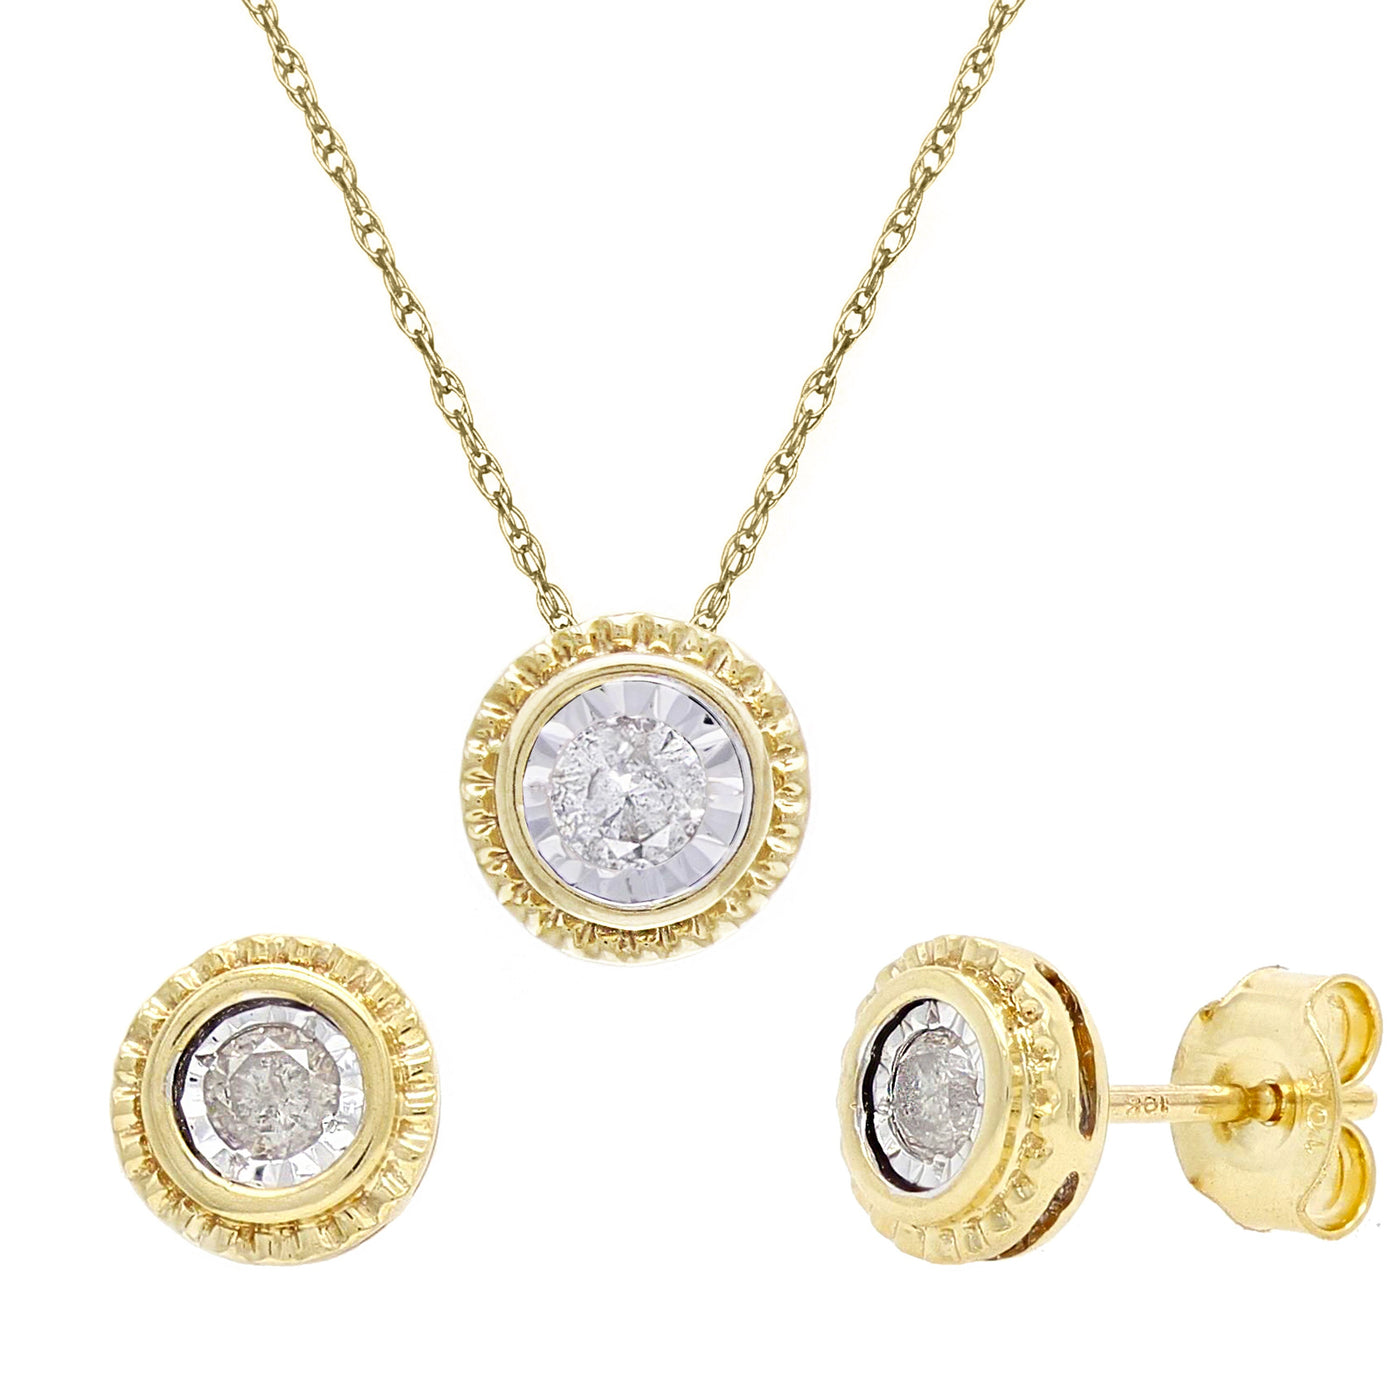 Real diamond and gold necklace and earring set by Direct Source Gold & Diamond.